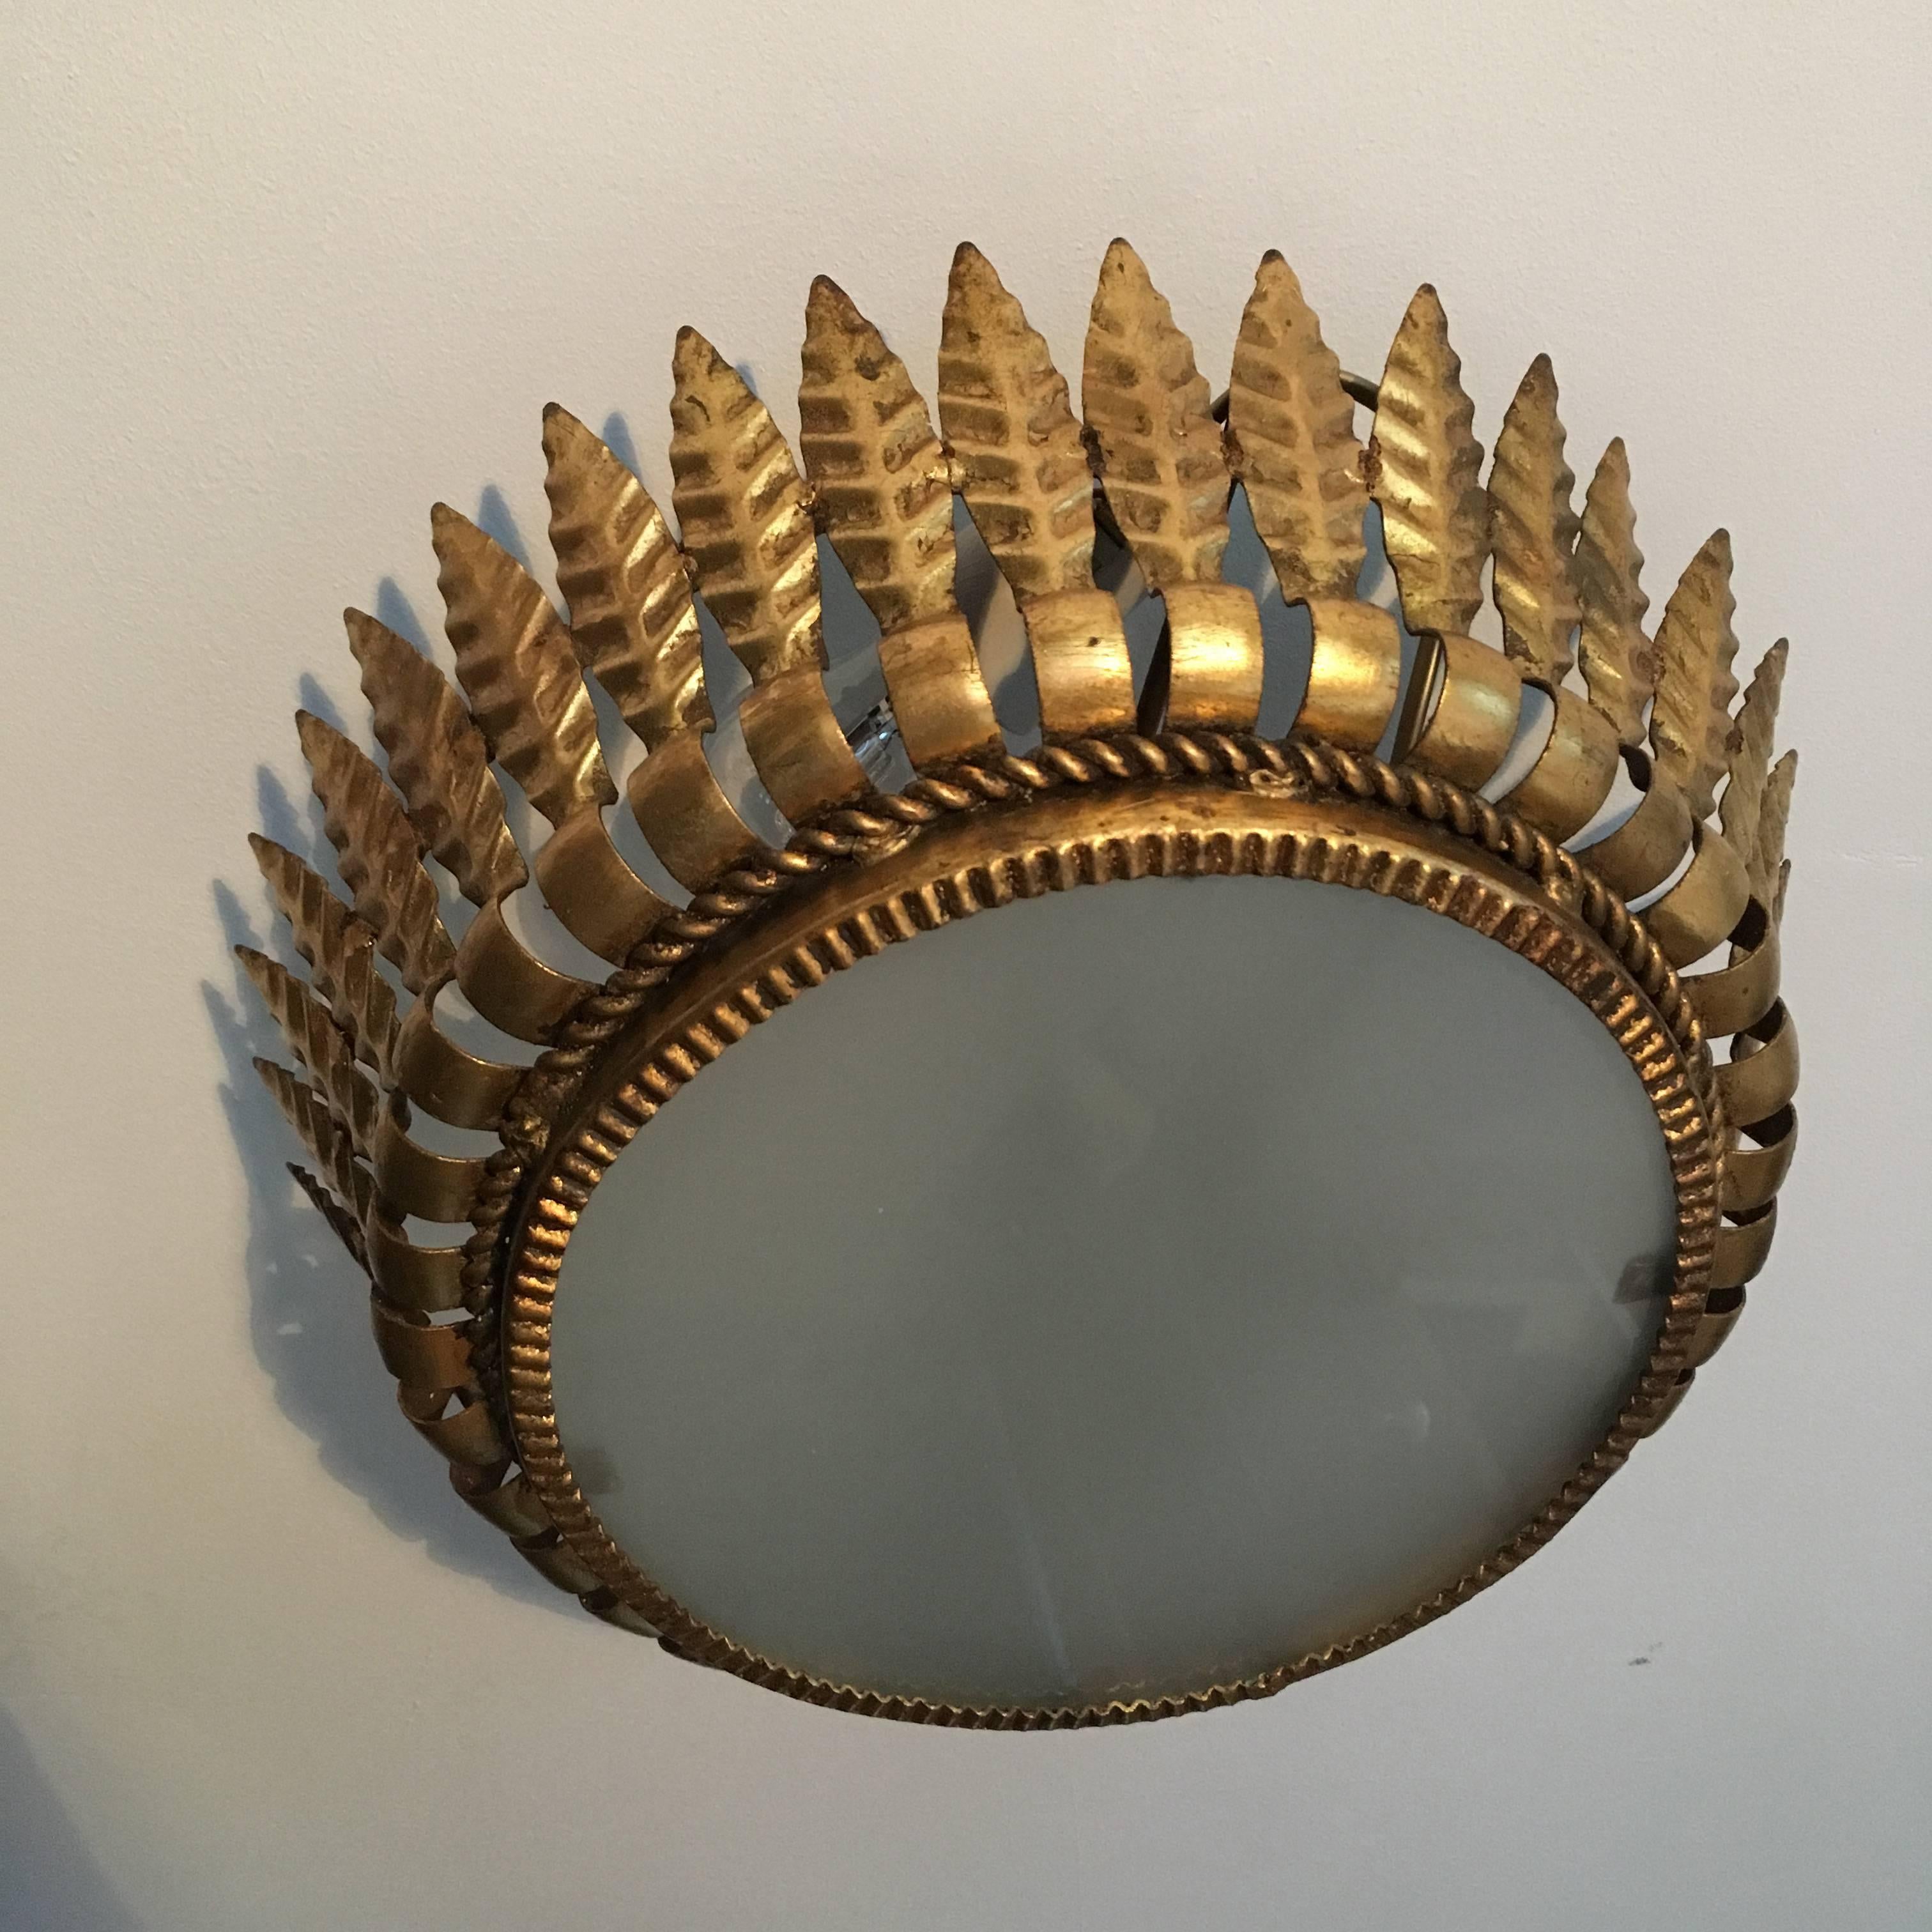 A beautiful gilt metal handcrafted crown ceiling light with twisted border detail and frosted glass diffuser.

The light is a crown of golden textured leaves arranged with a twisted rope effect border surrounding the glass panel. 

This light